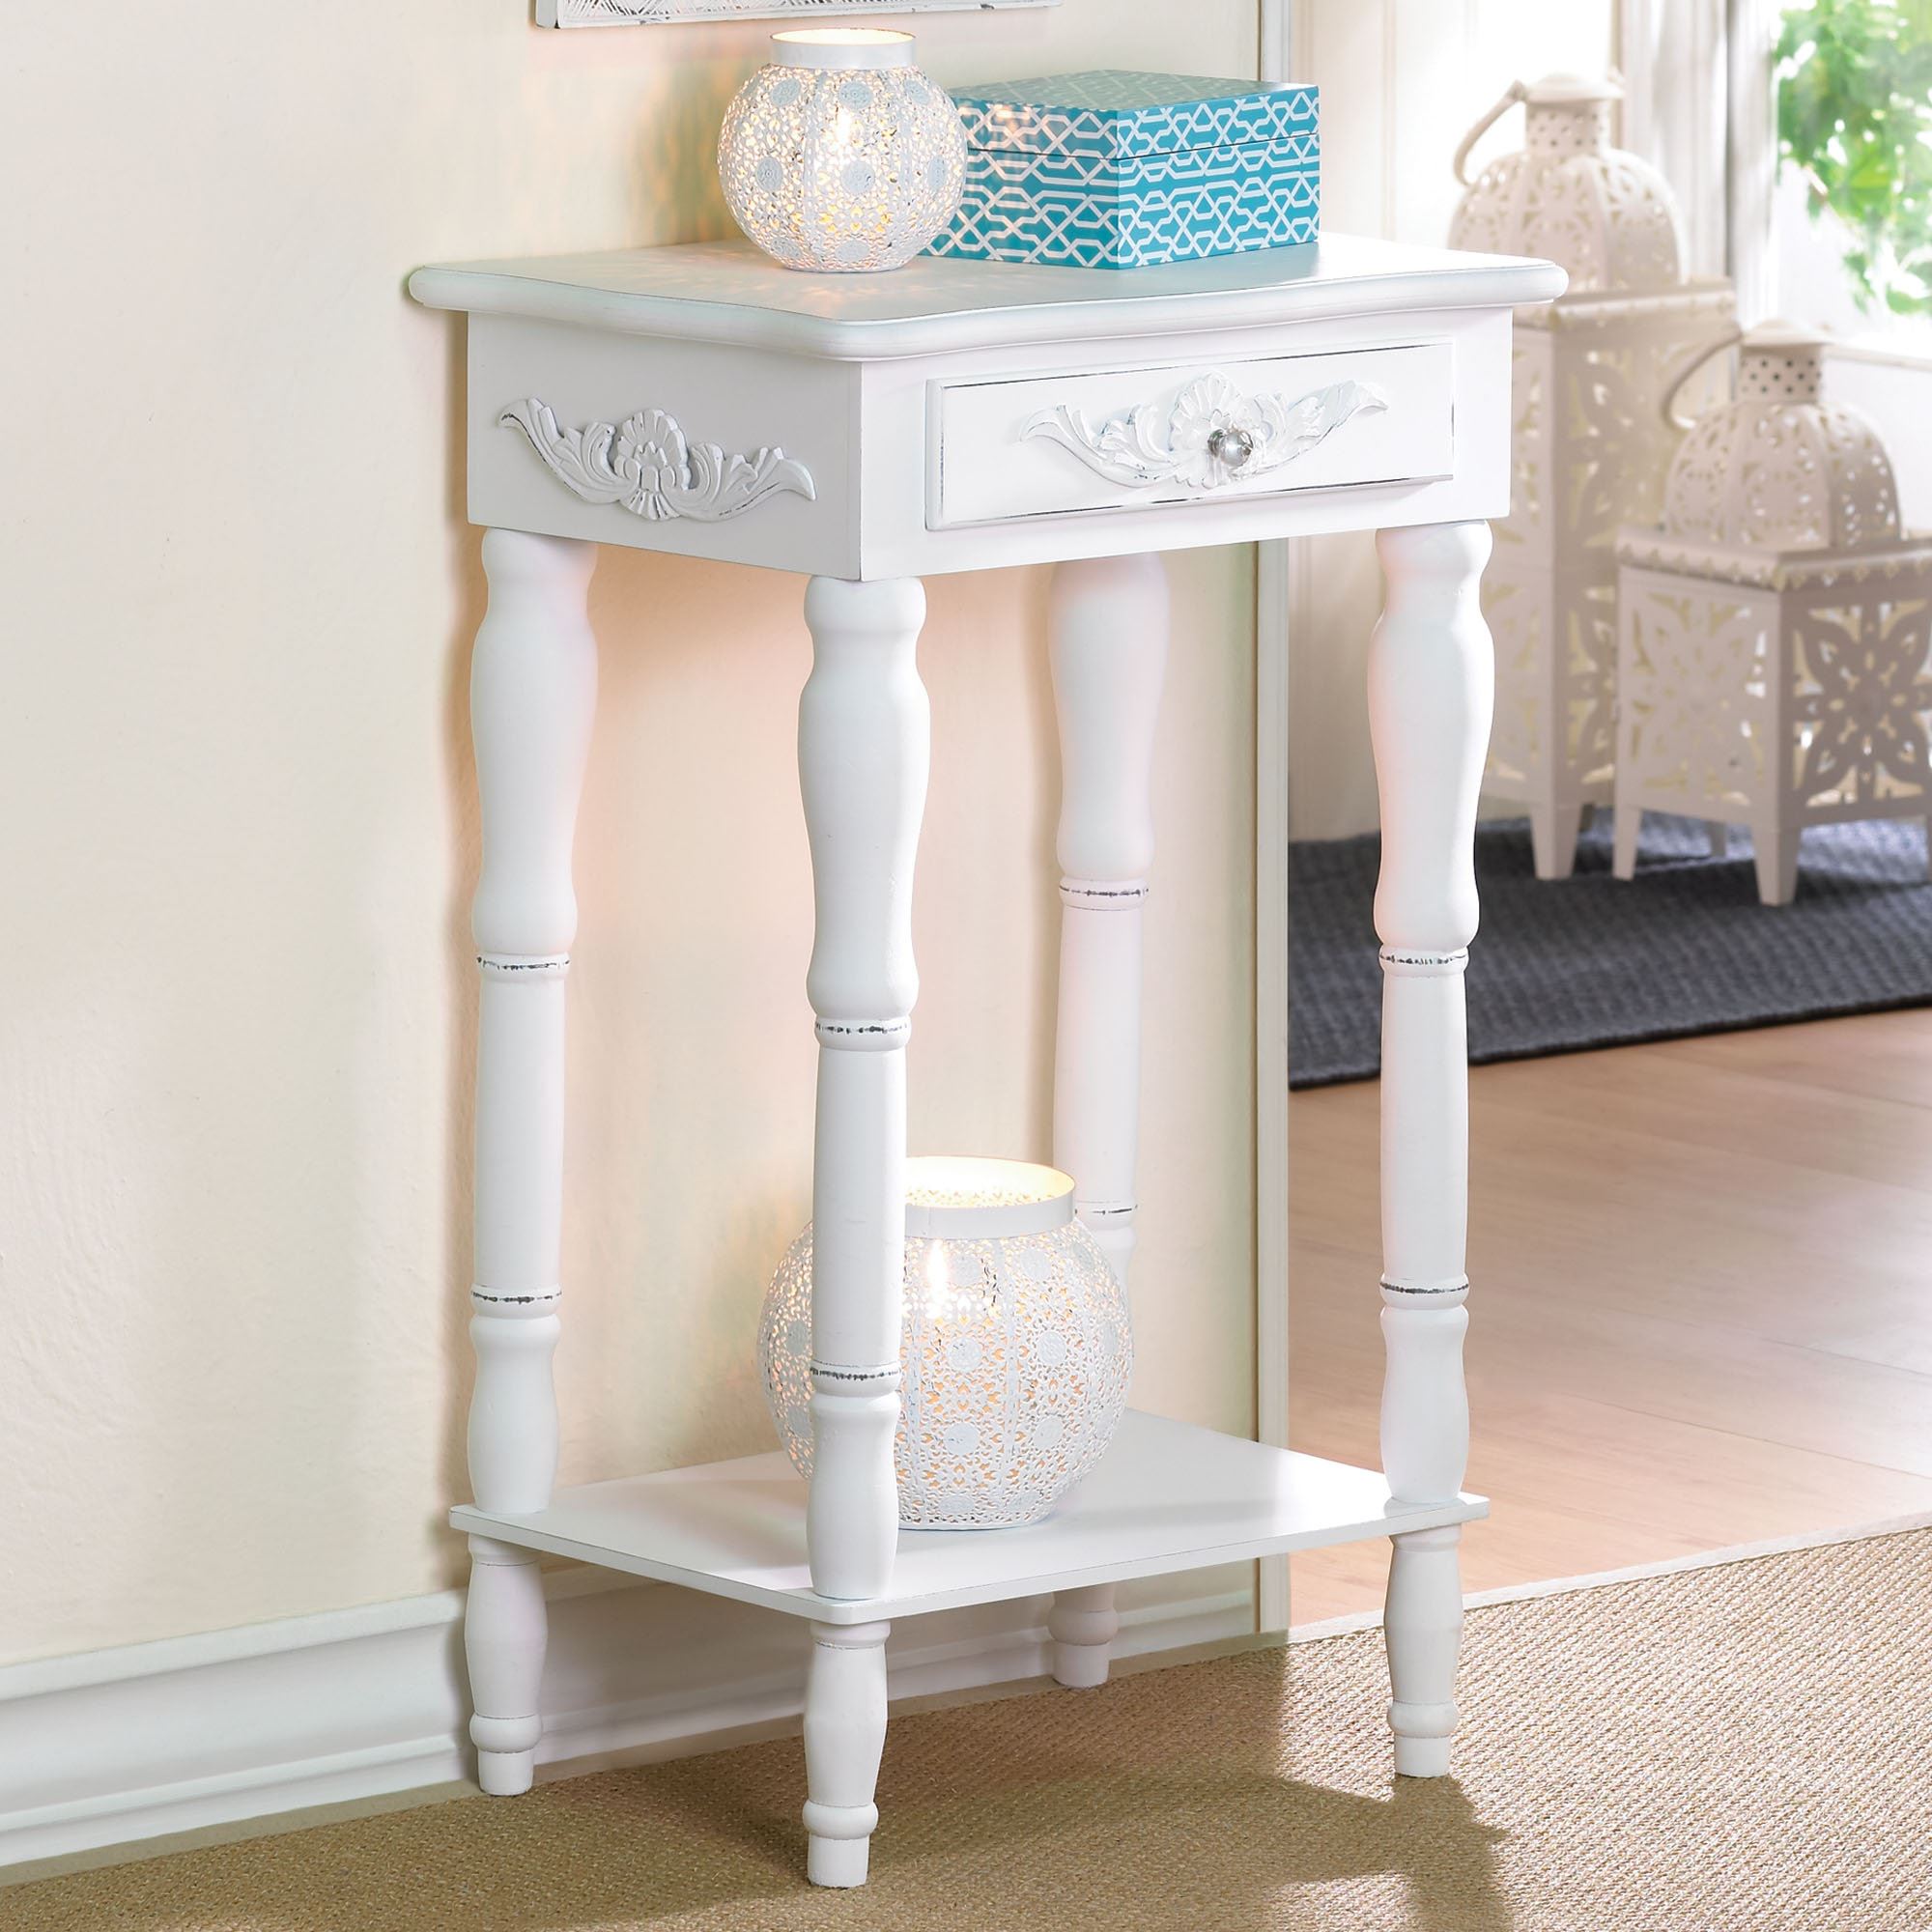 cosenza antique white accent table with drawer tall you might also consider black maritime pendant chairs and free quilted runner patterns small coffee modern furniture lighting